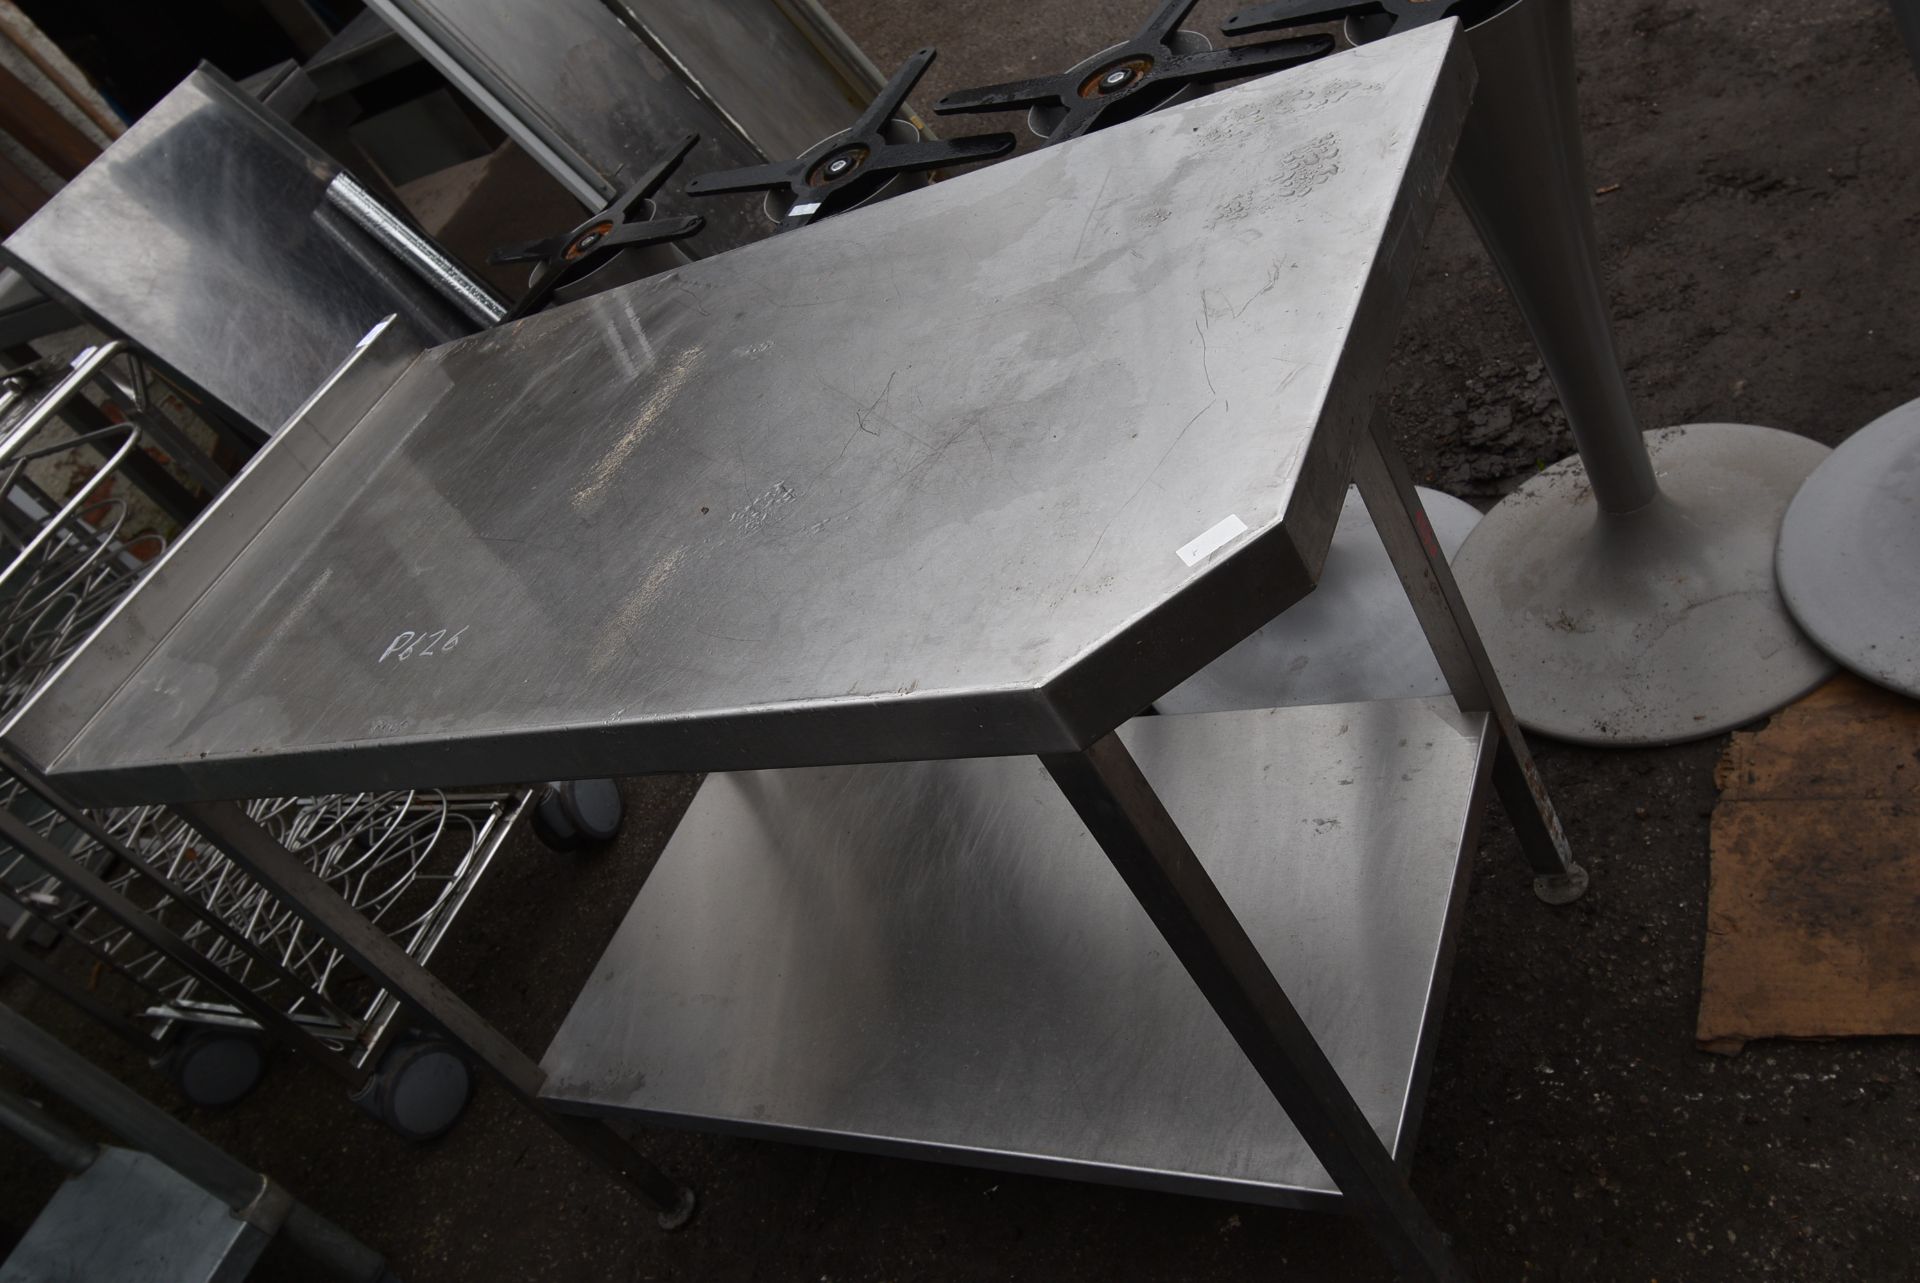 Stainless Steel Preparation Table with Undershelf - Image 2 of 2